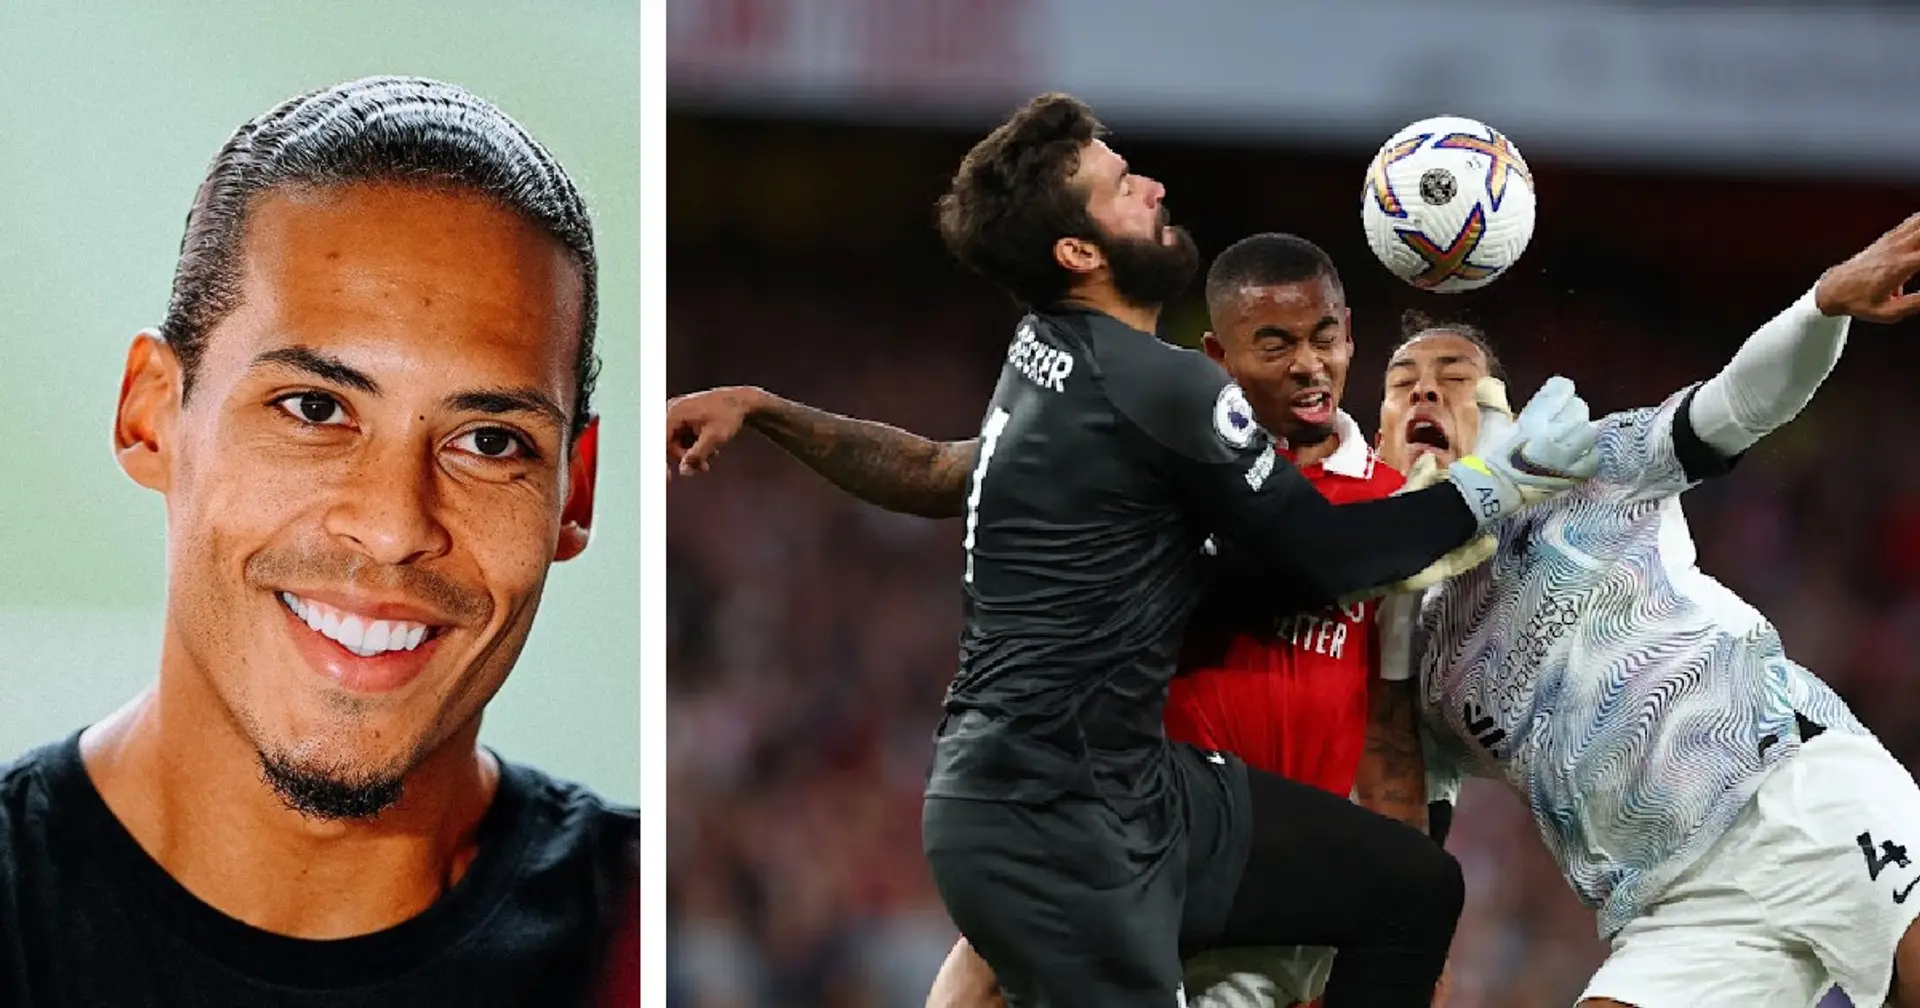 Van Dijk picks former Arsenal player and current star as toughest opponents 